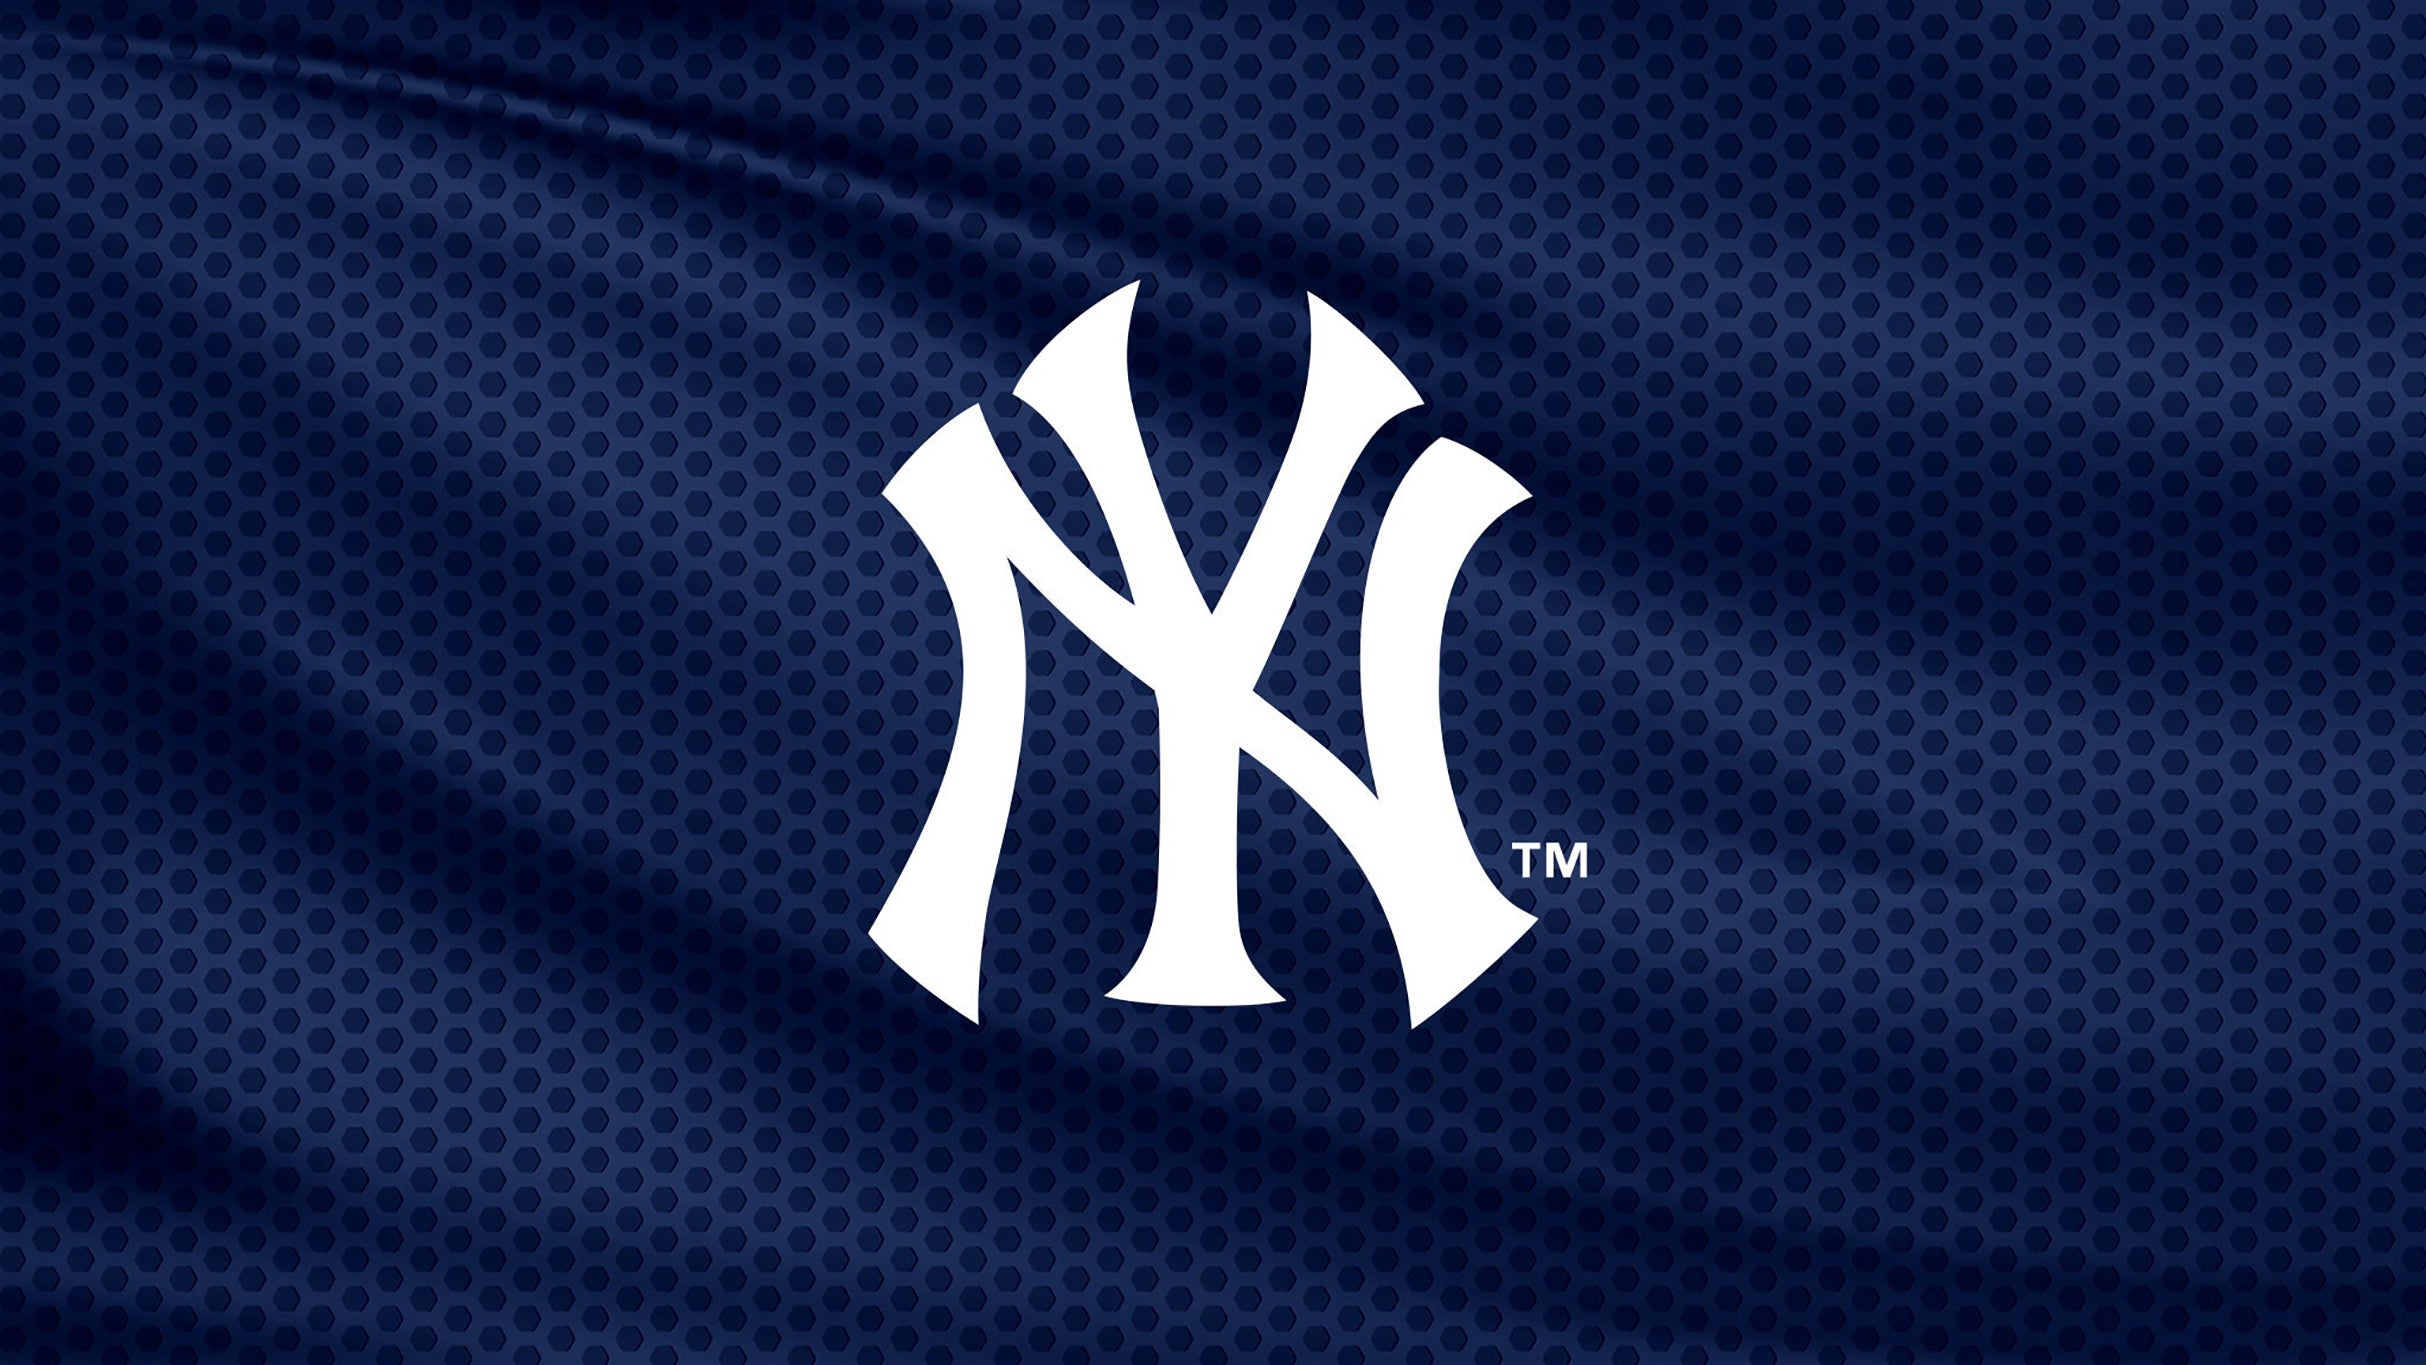 New York Yankees vs. Tampa Bay Rays in Bronx promo photo for NY Yankees Community Text Subscribers presale offer code